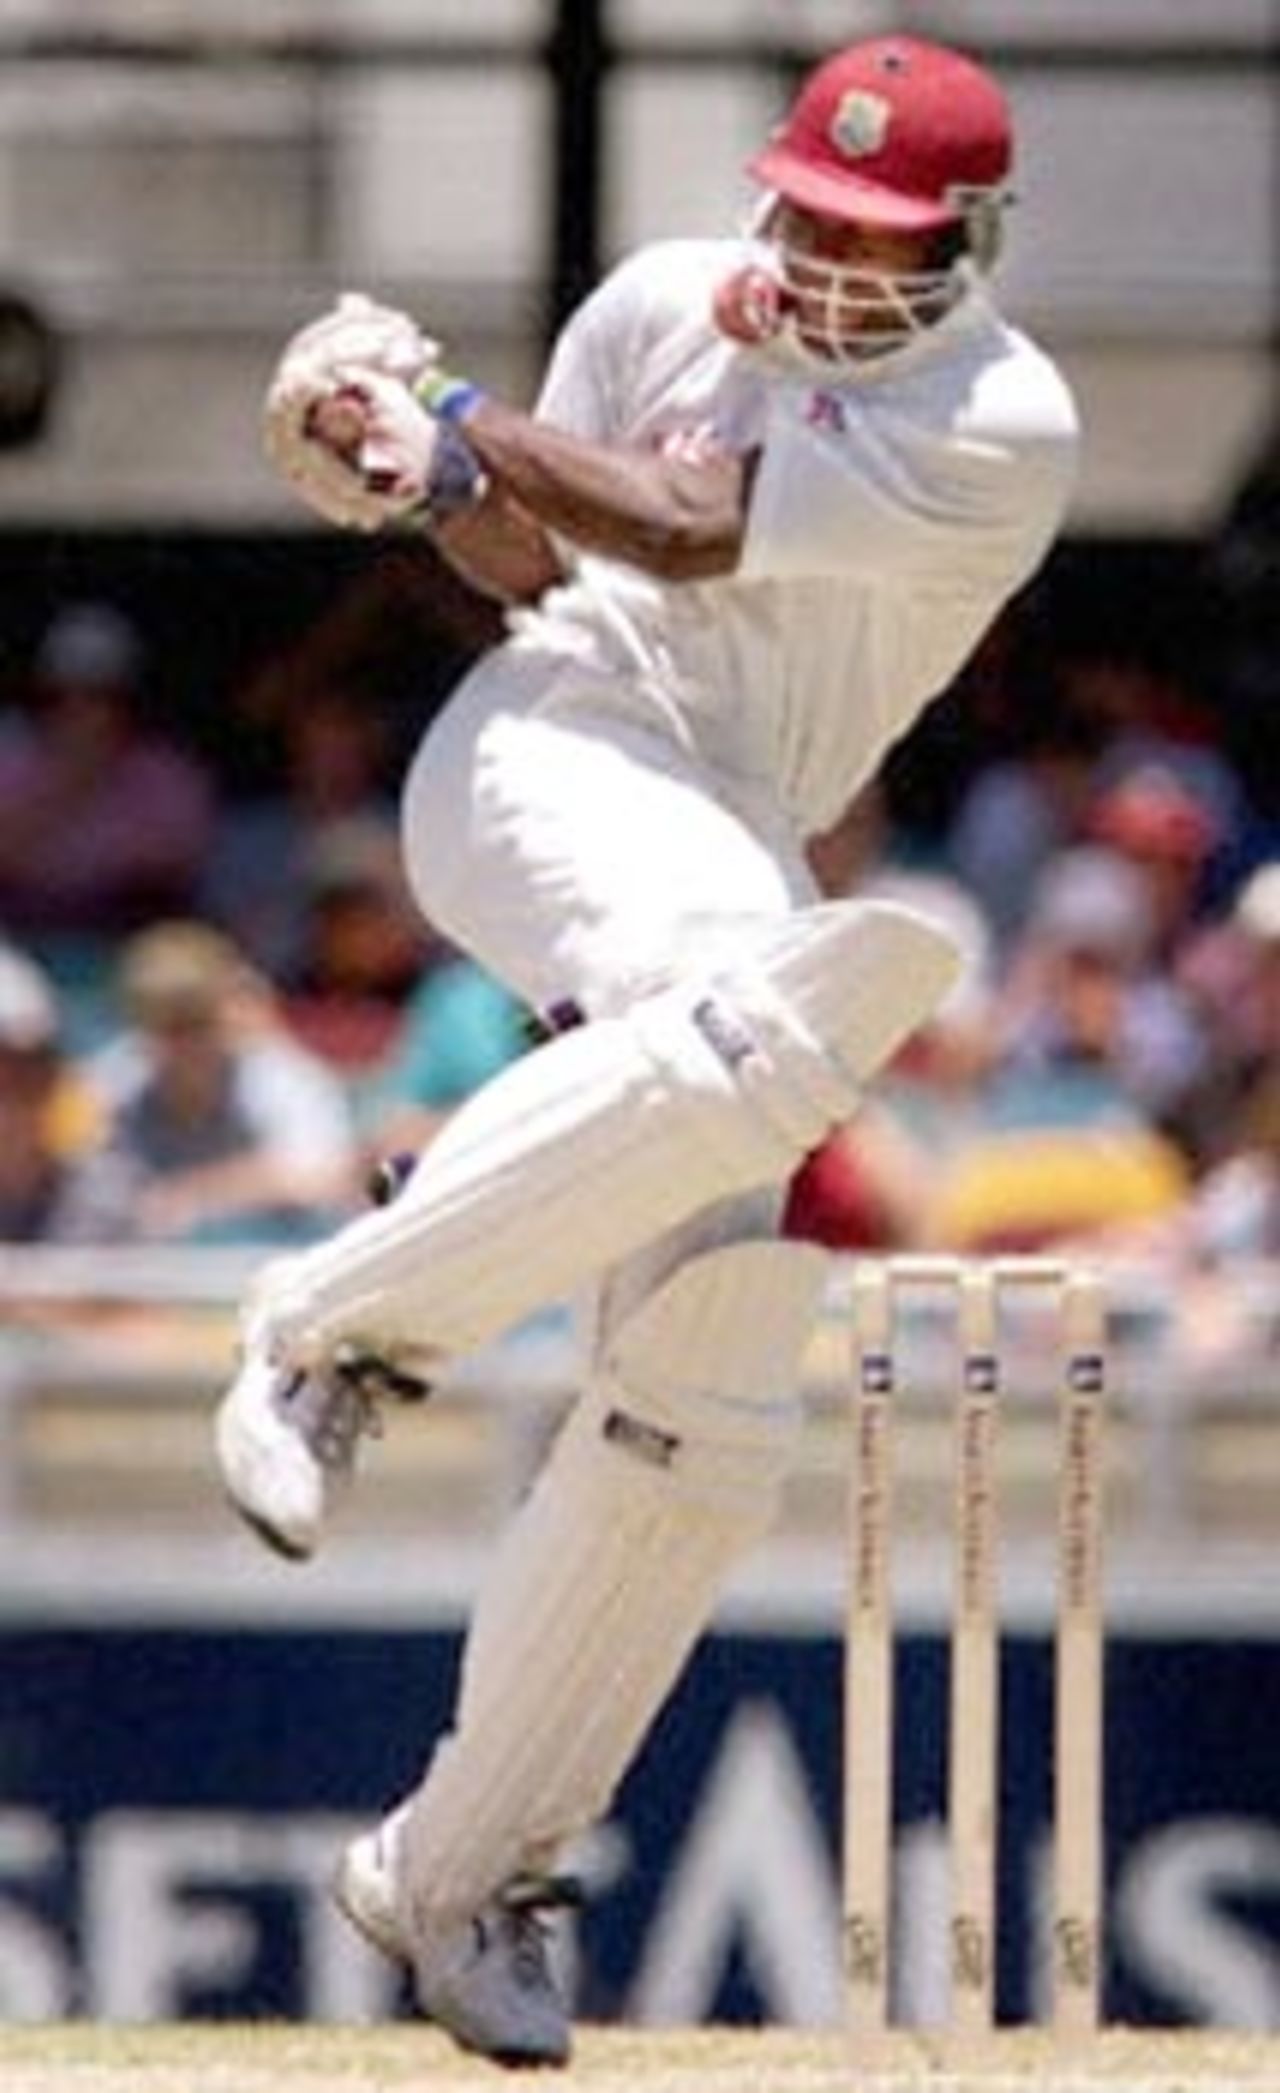 West Indian batsman Ridley Jacobs is hit in the face by a bouncer from Australian speedster  Brett Lee on the third day of the first Test match at the Gabba in Brisbane, 25 November 2000. At lunch the West Indies were struggling in their second innings at 81-6, still trailing Australia by 169 runs.